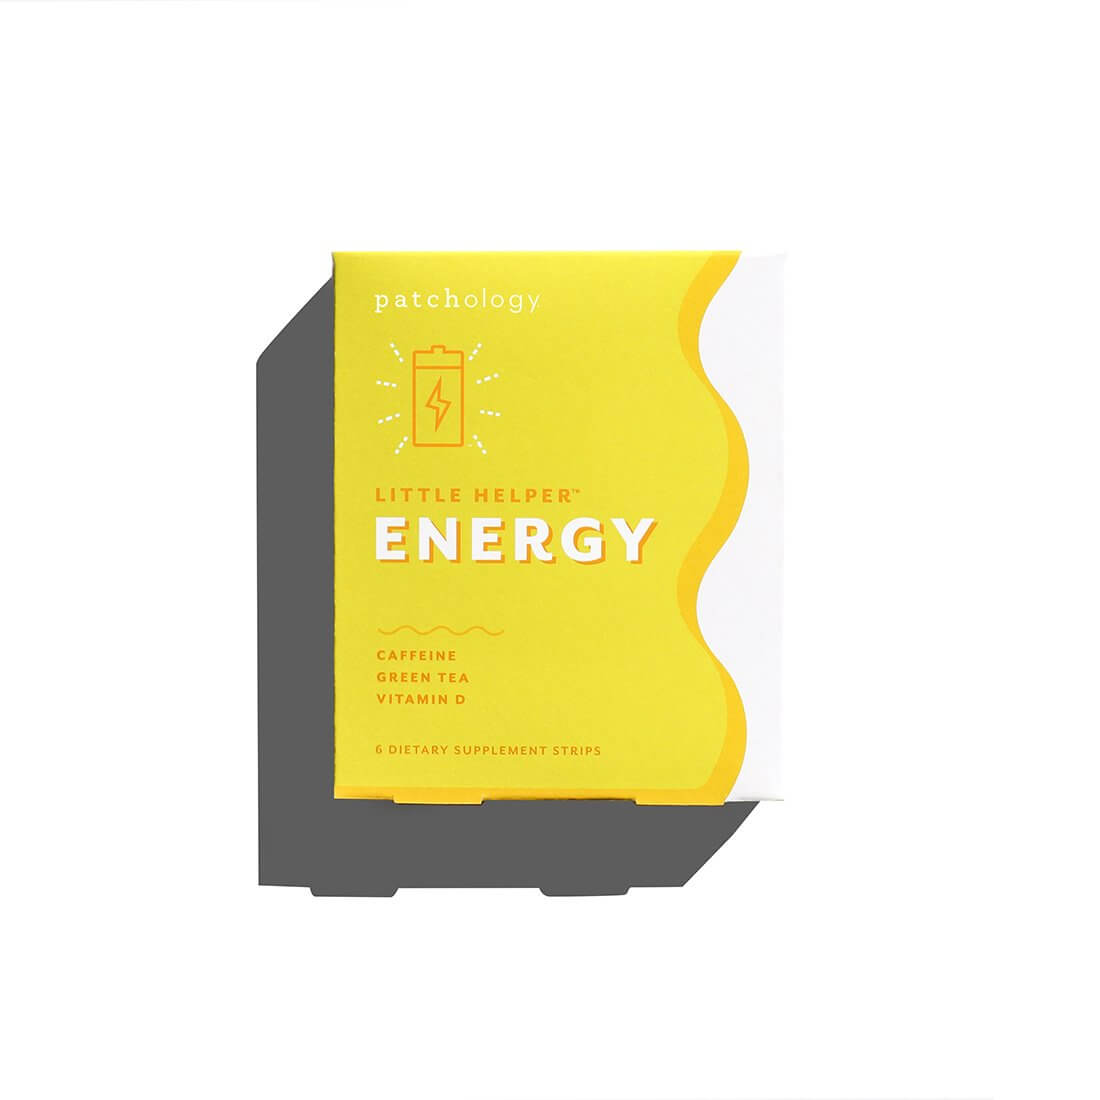 Little Helpers® Supplement Strips: Energy - box only